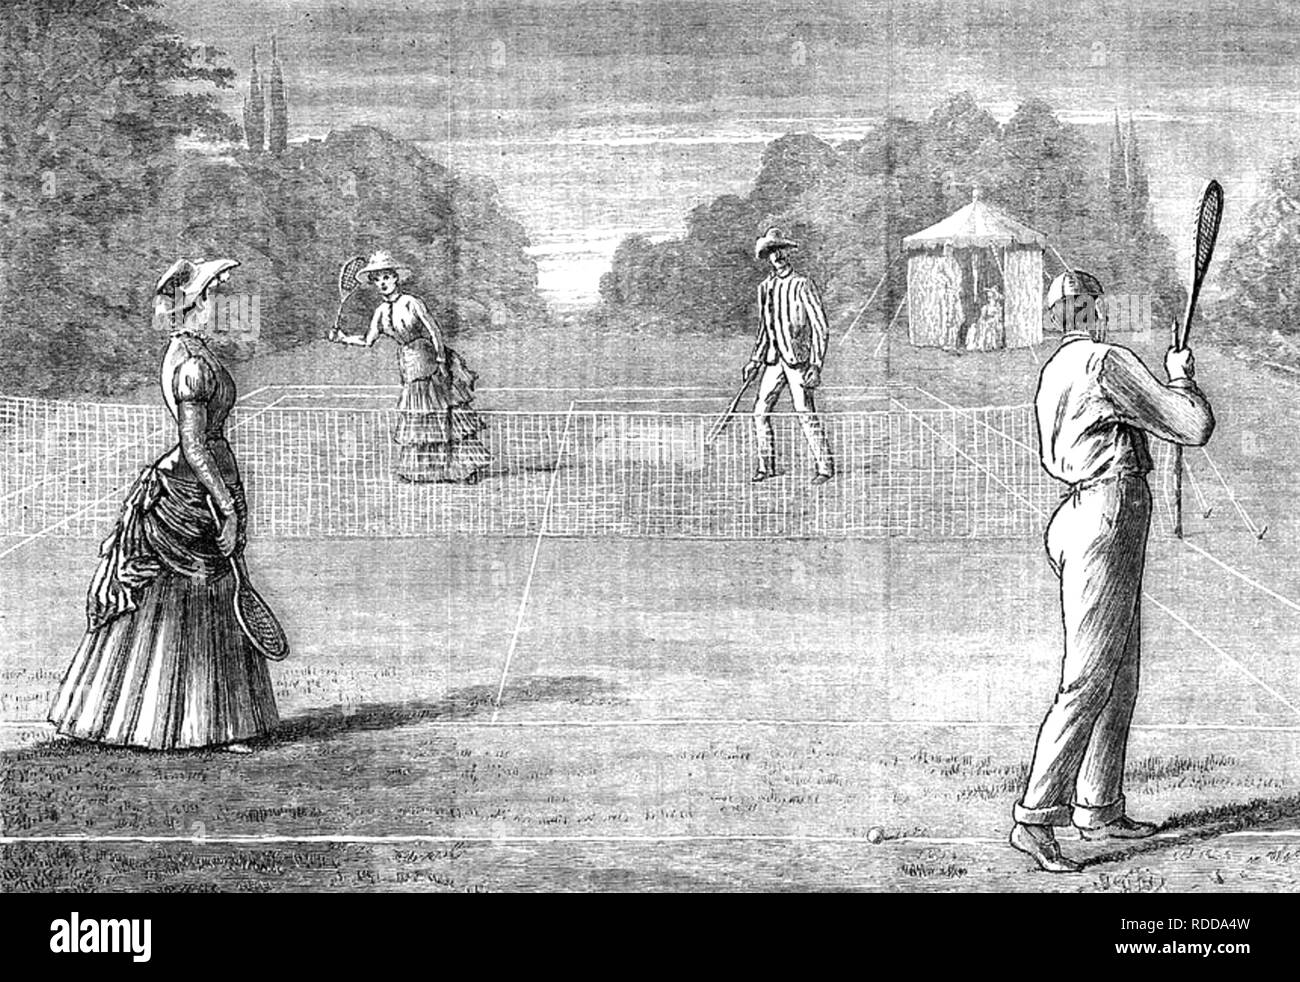 MIXED DOUBLES TENNIS MATCH about 1880 Stock Photo